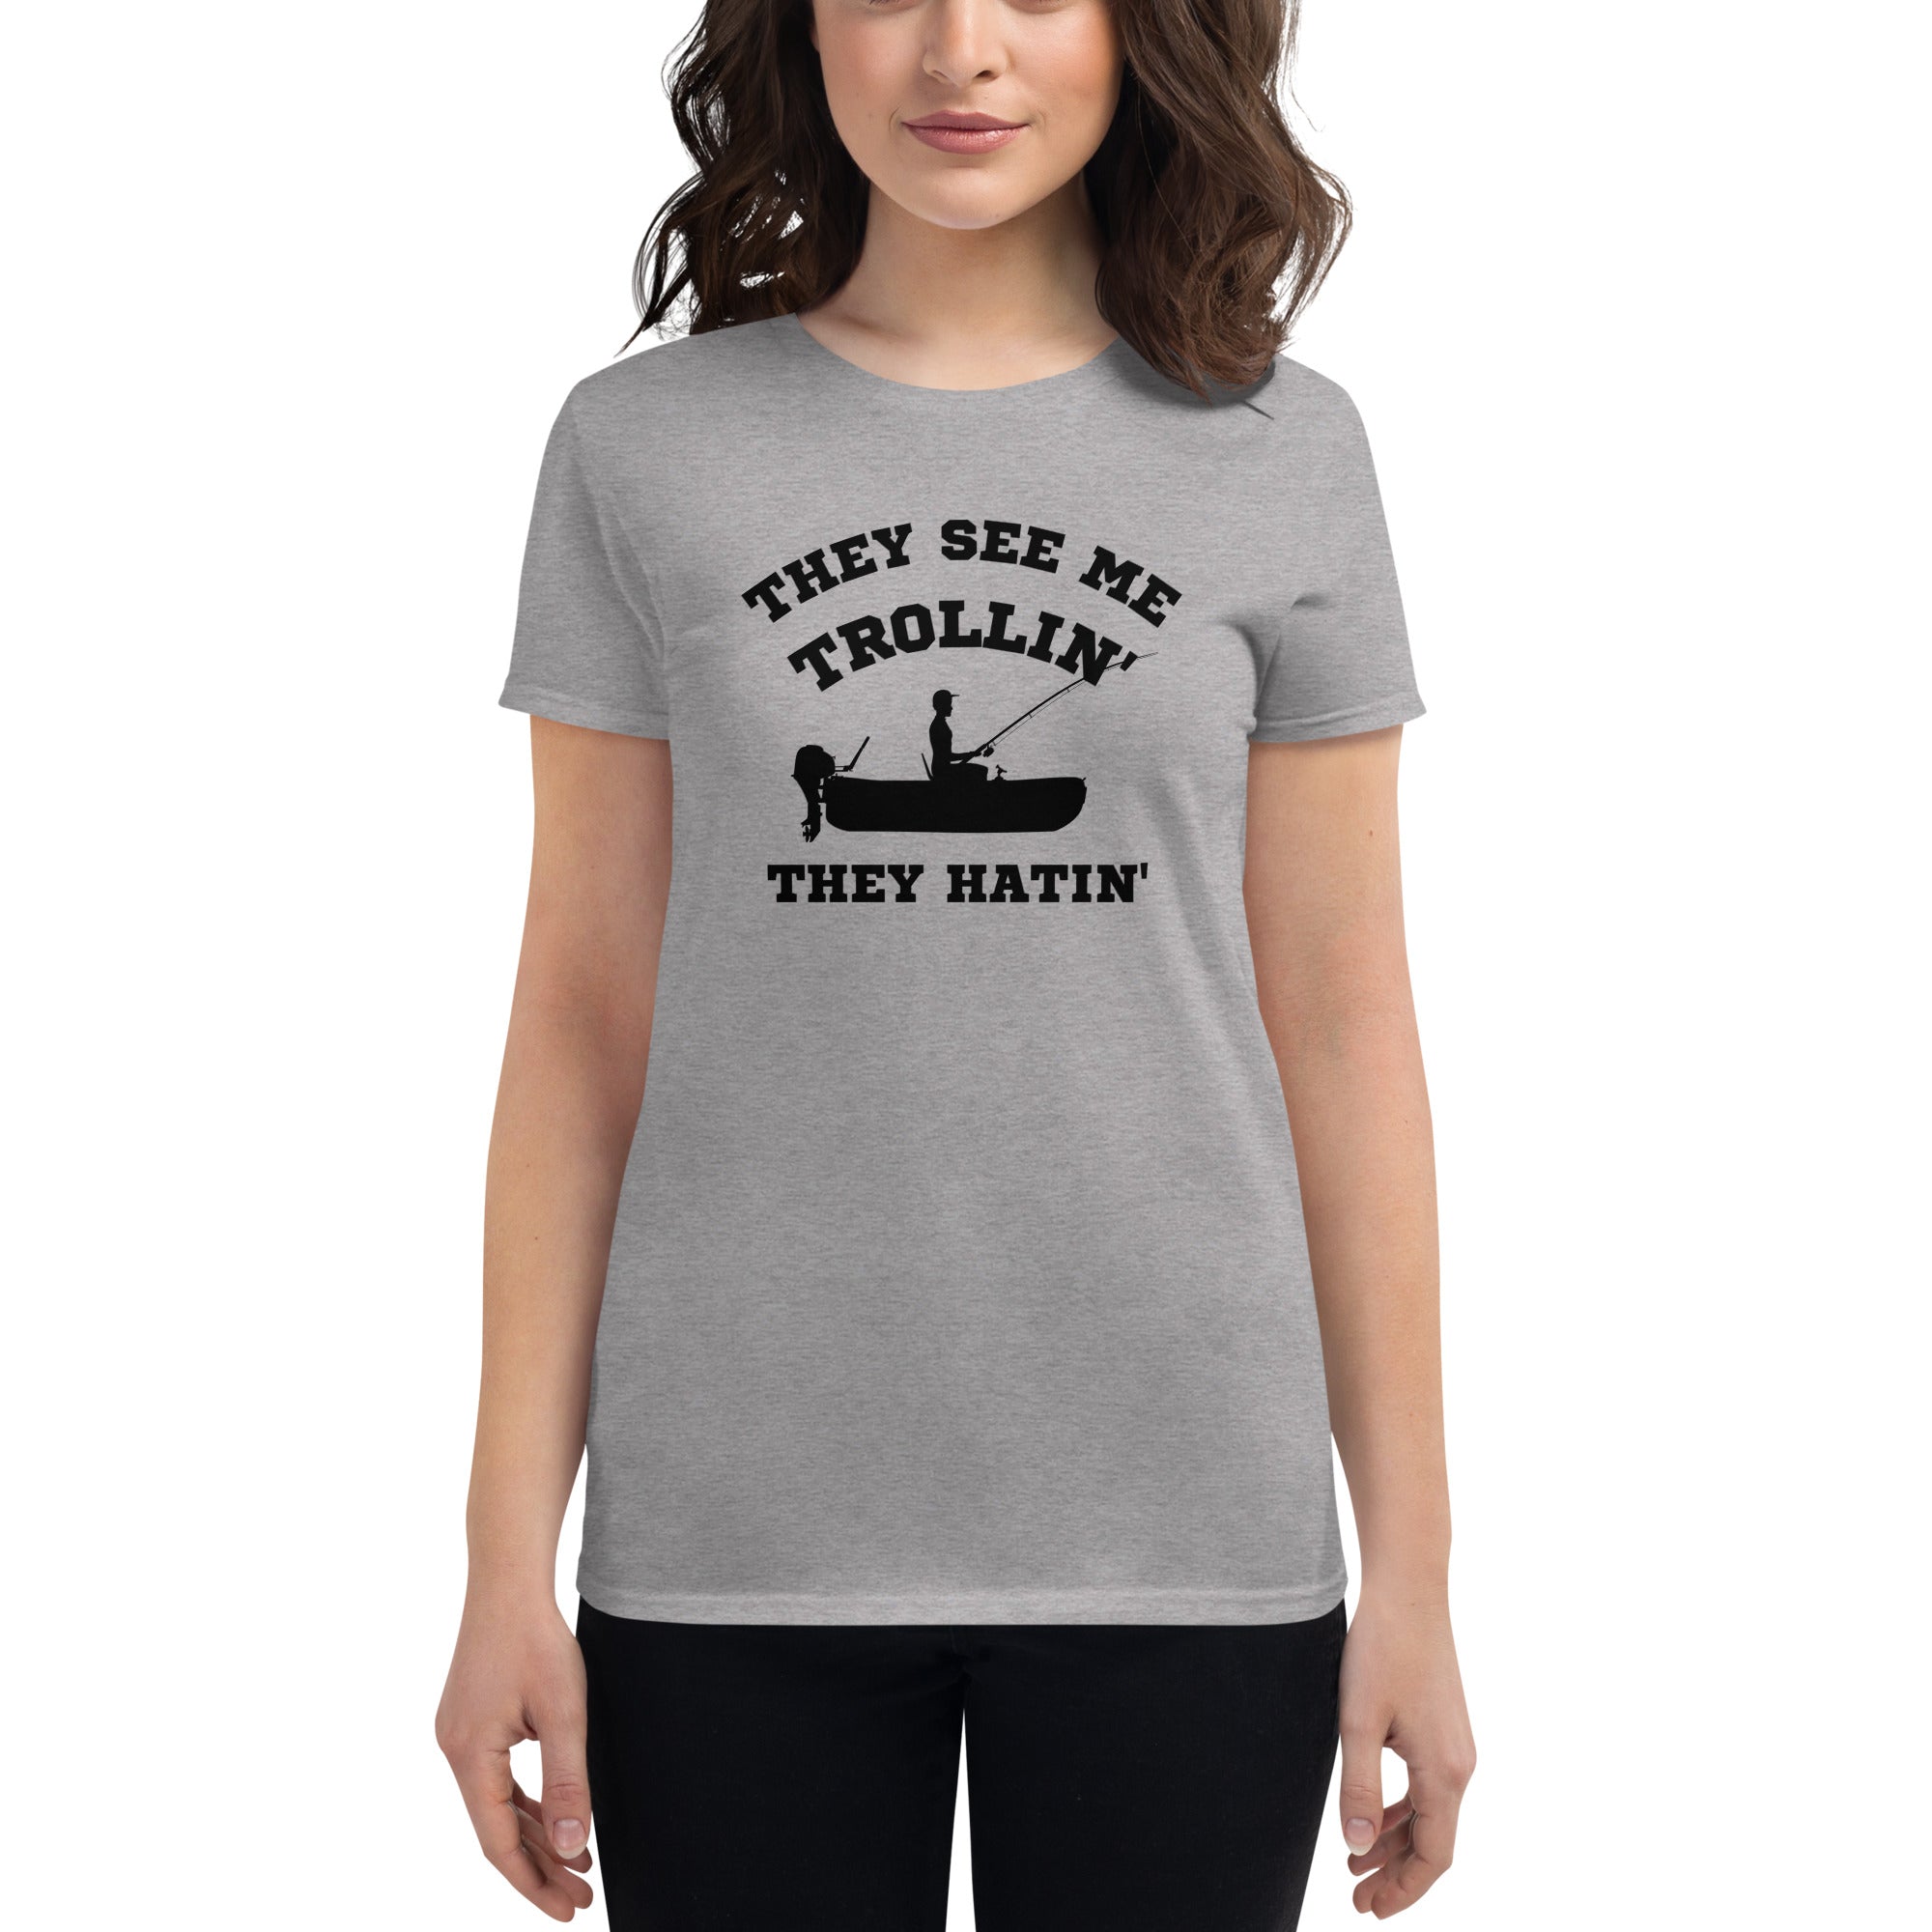 They See Me Trollin' Women's Fitted T-Shirt